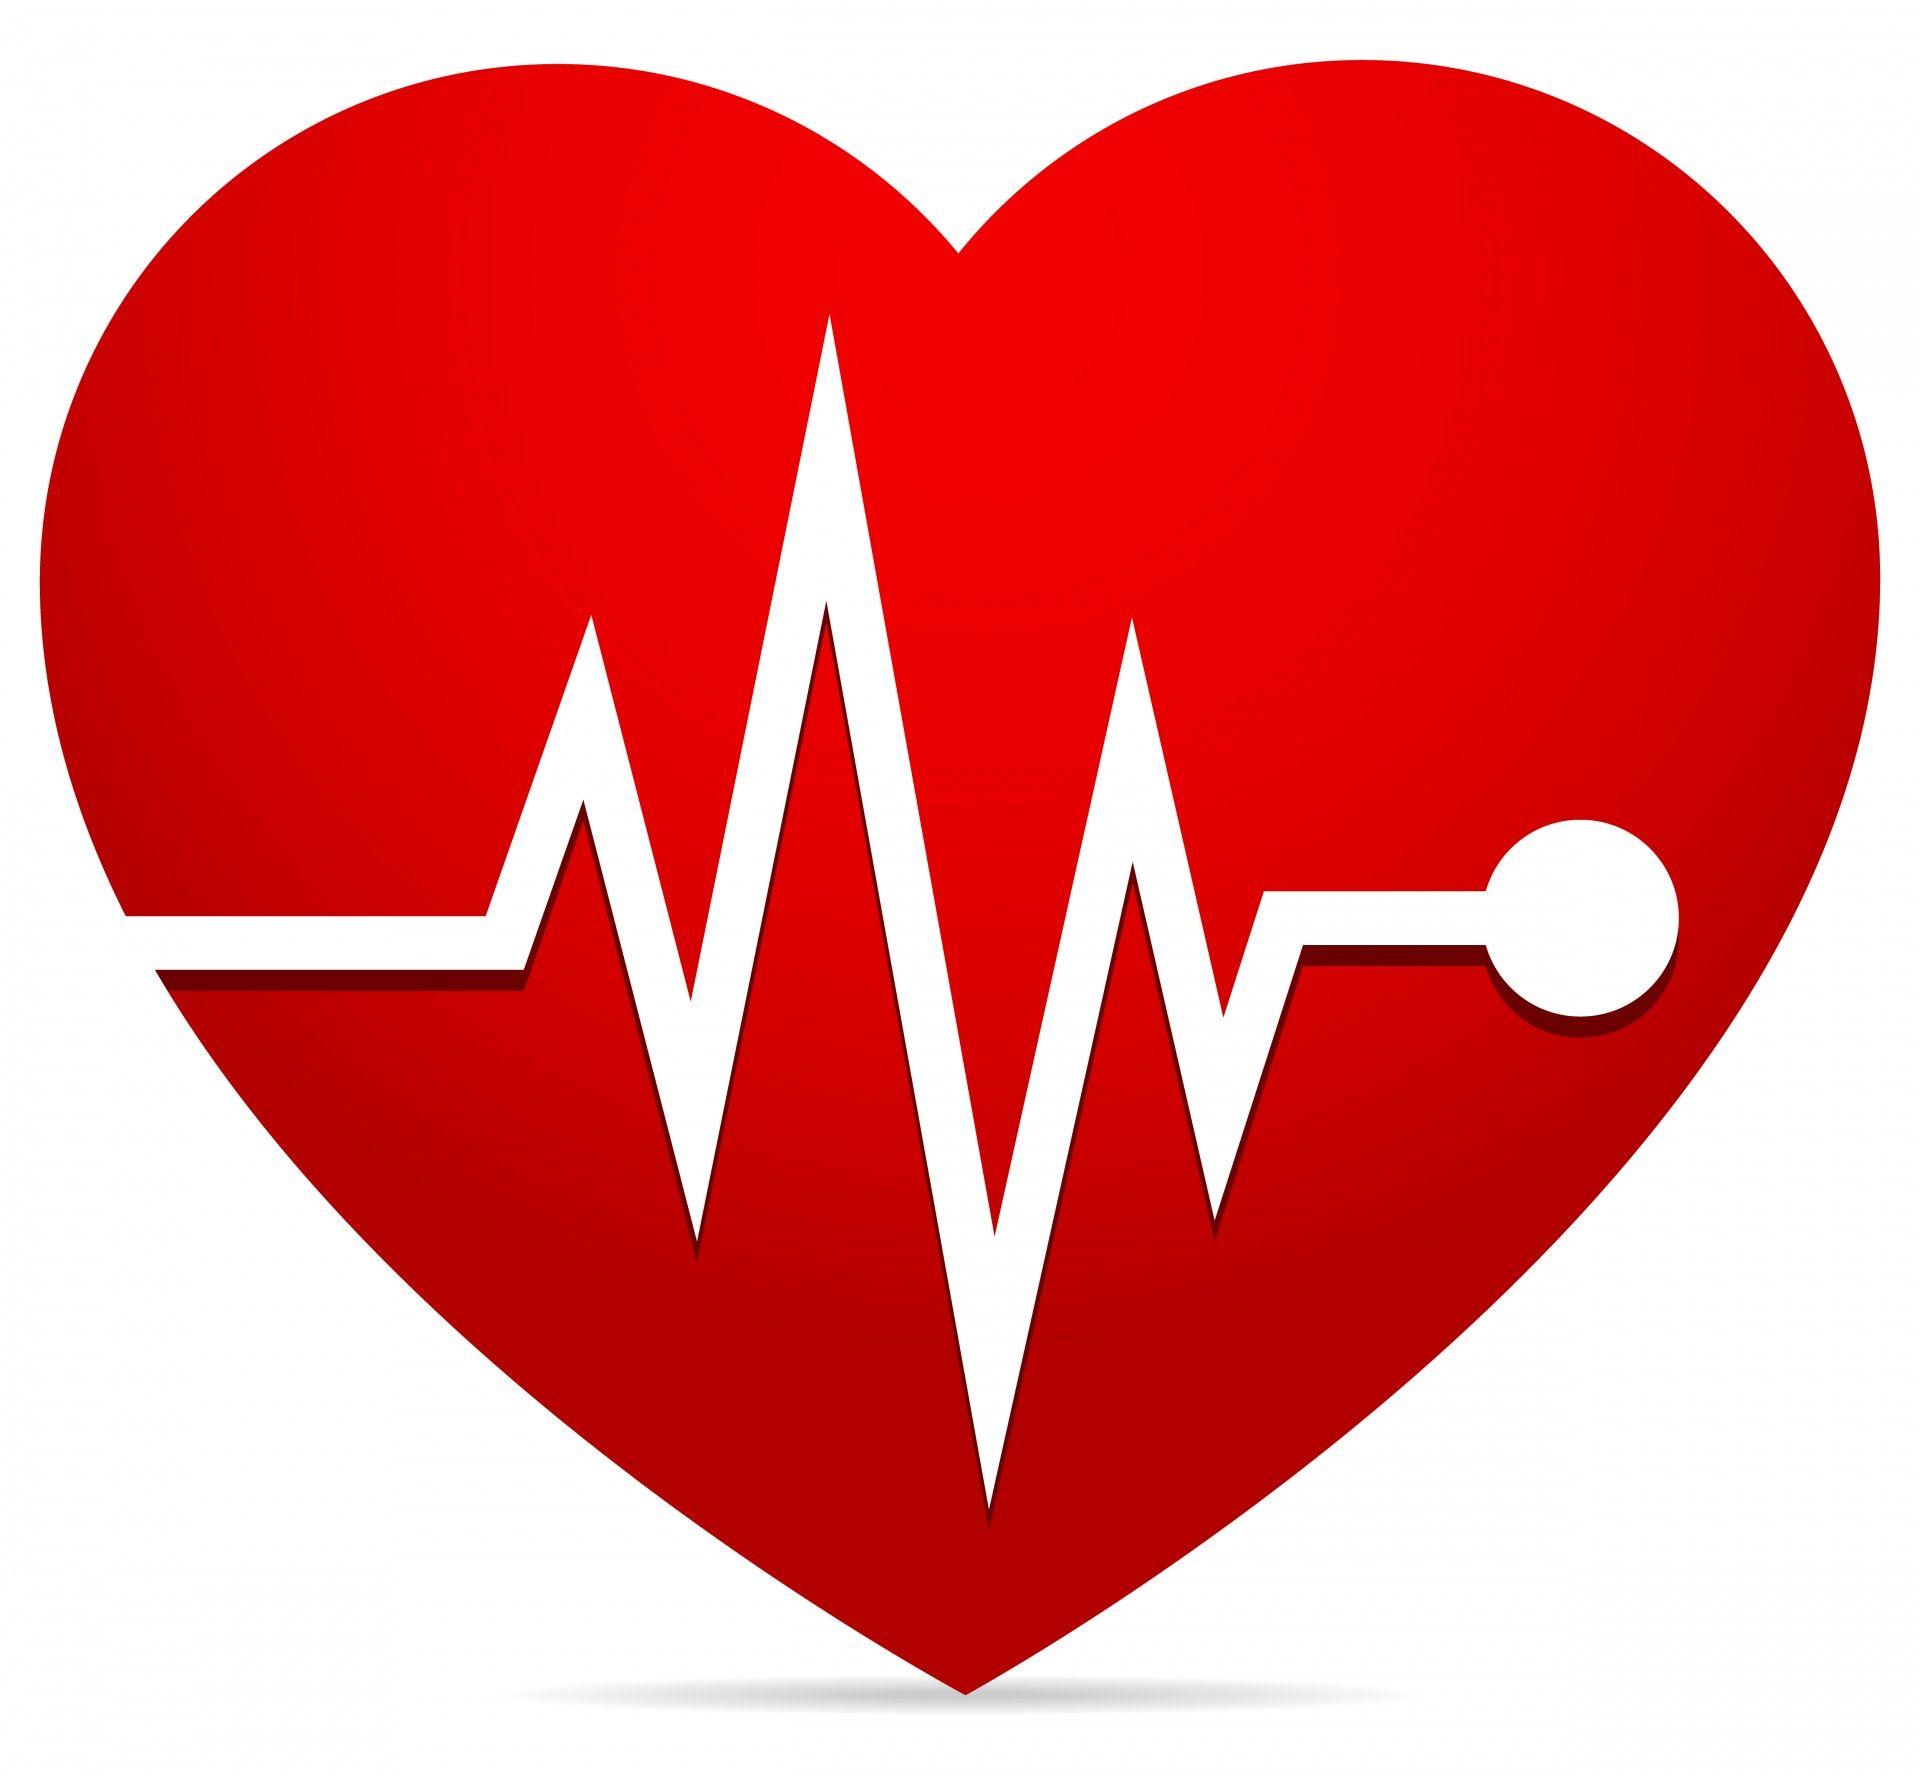 Heart Health Logo - Ways To Care For Your Heart Health This Summer Valley Hospital